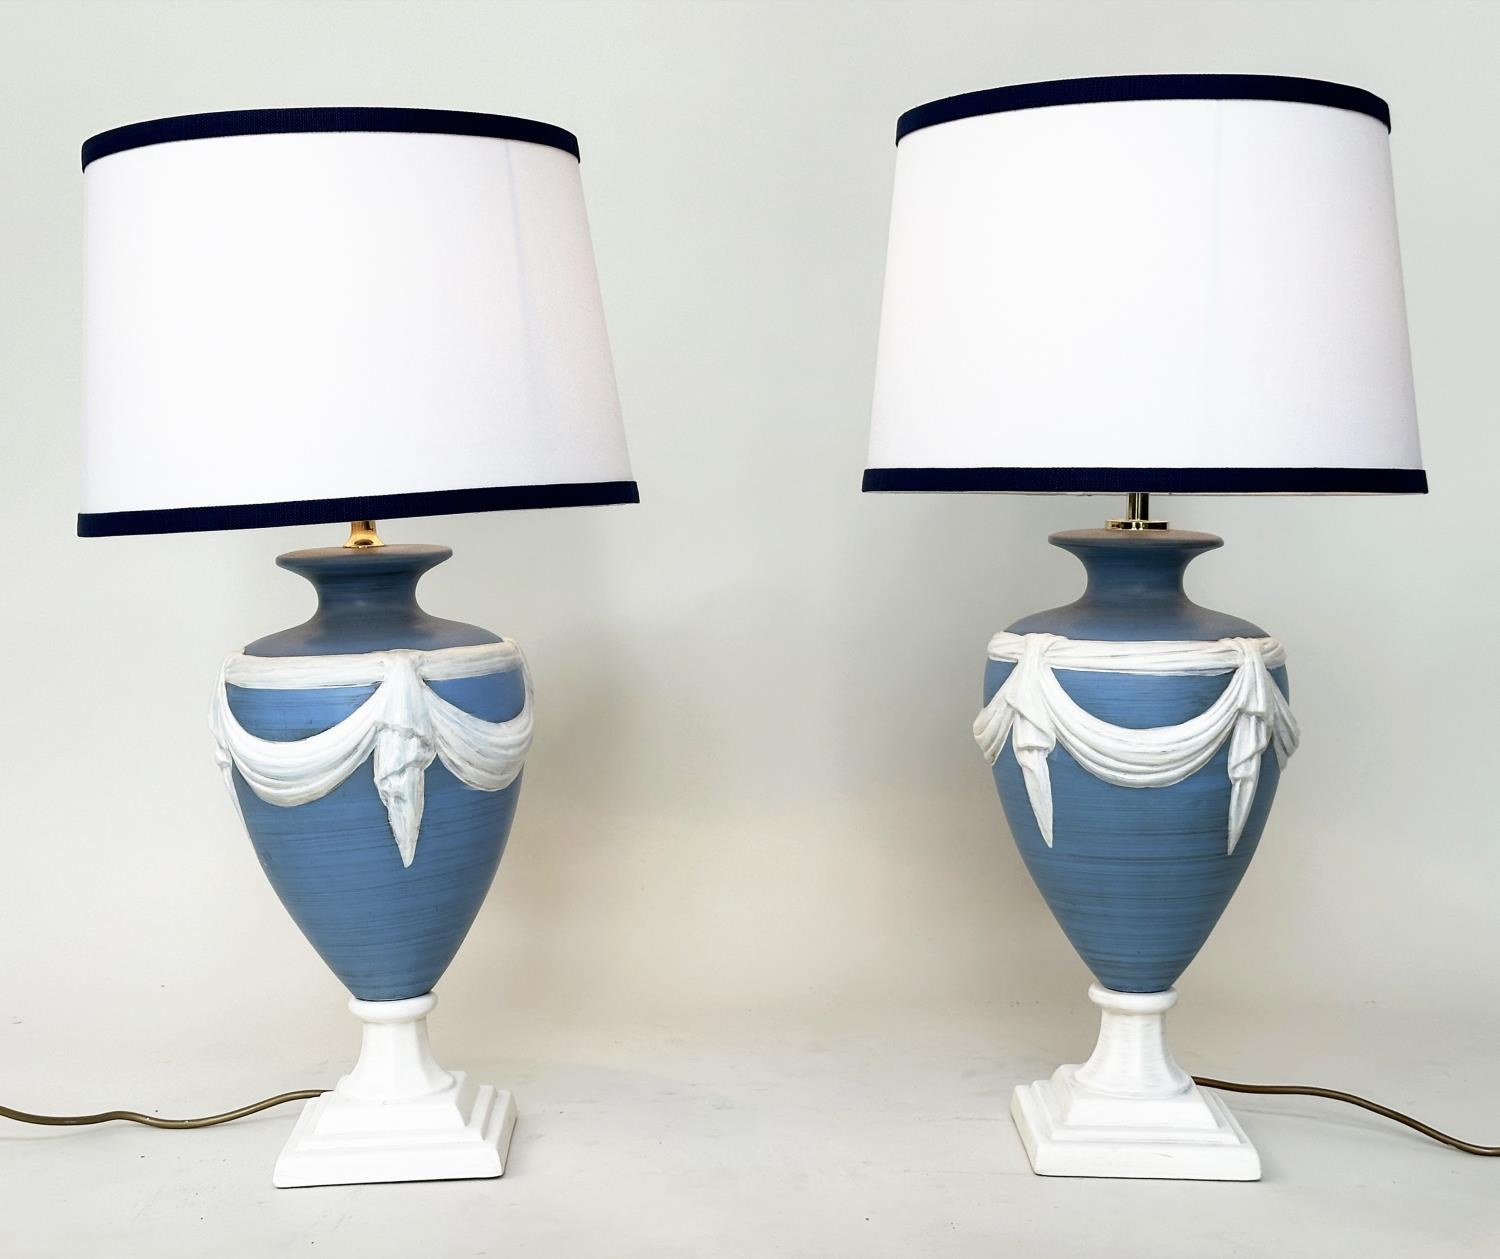 TABLE LAMPS, a pair, Wedgwood jasperware style of vase form with shades, 70cm H. - Image 8 of 12